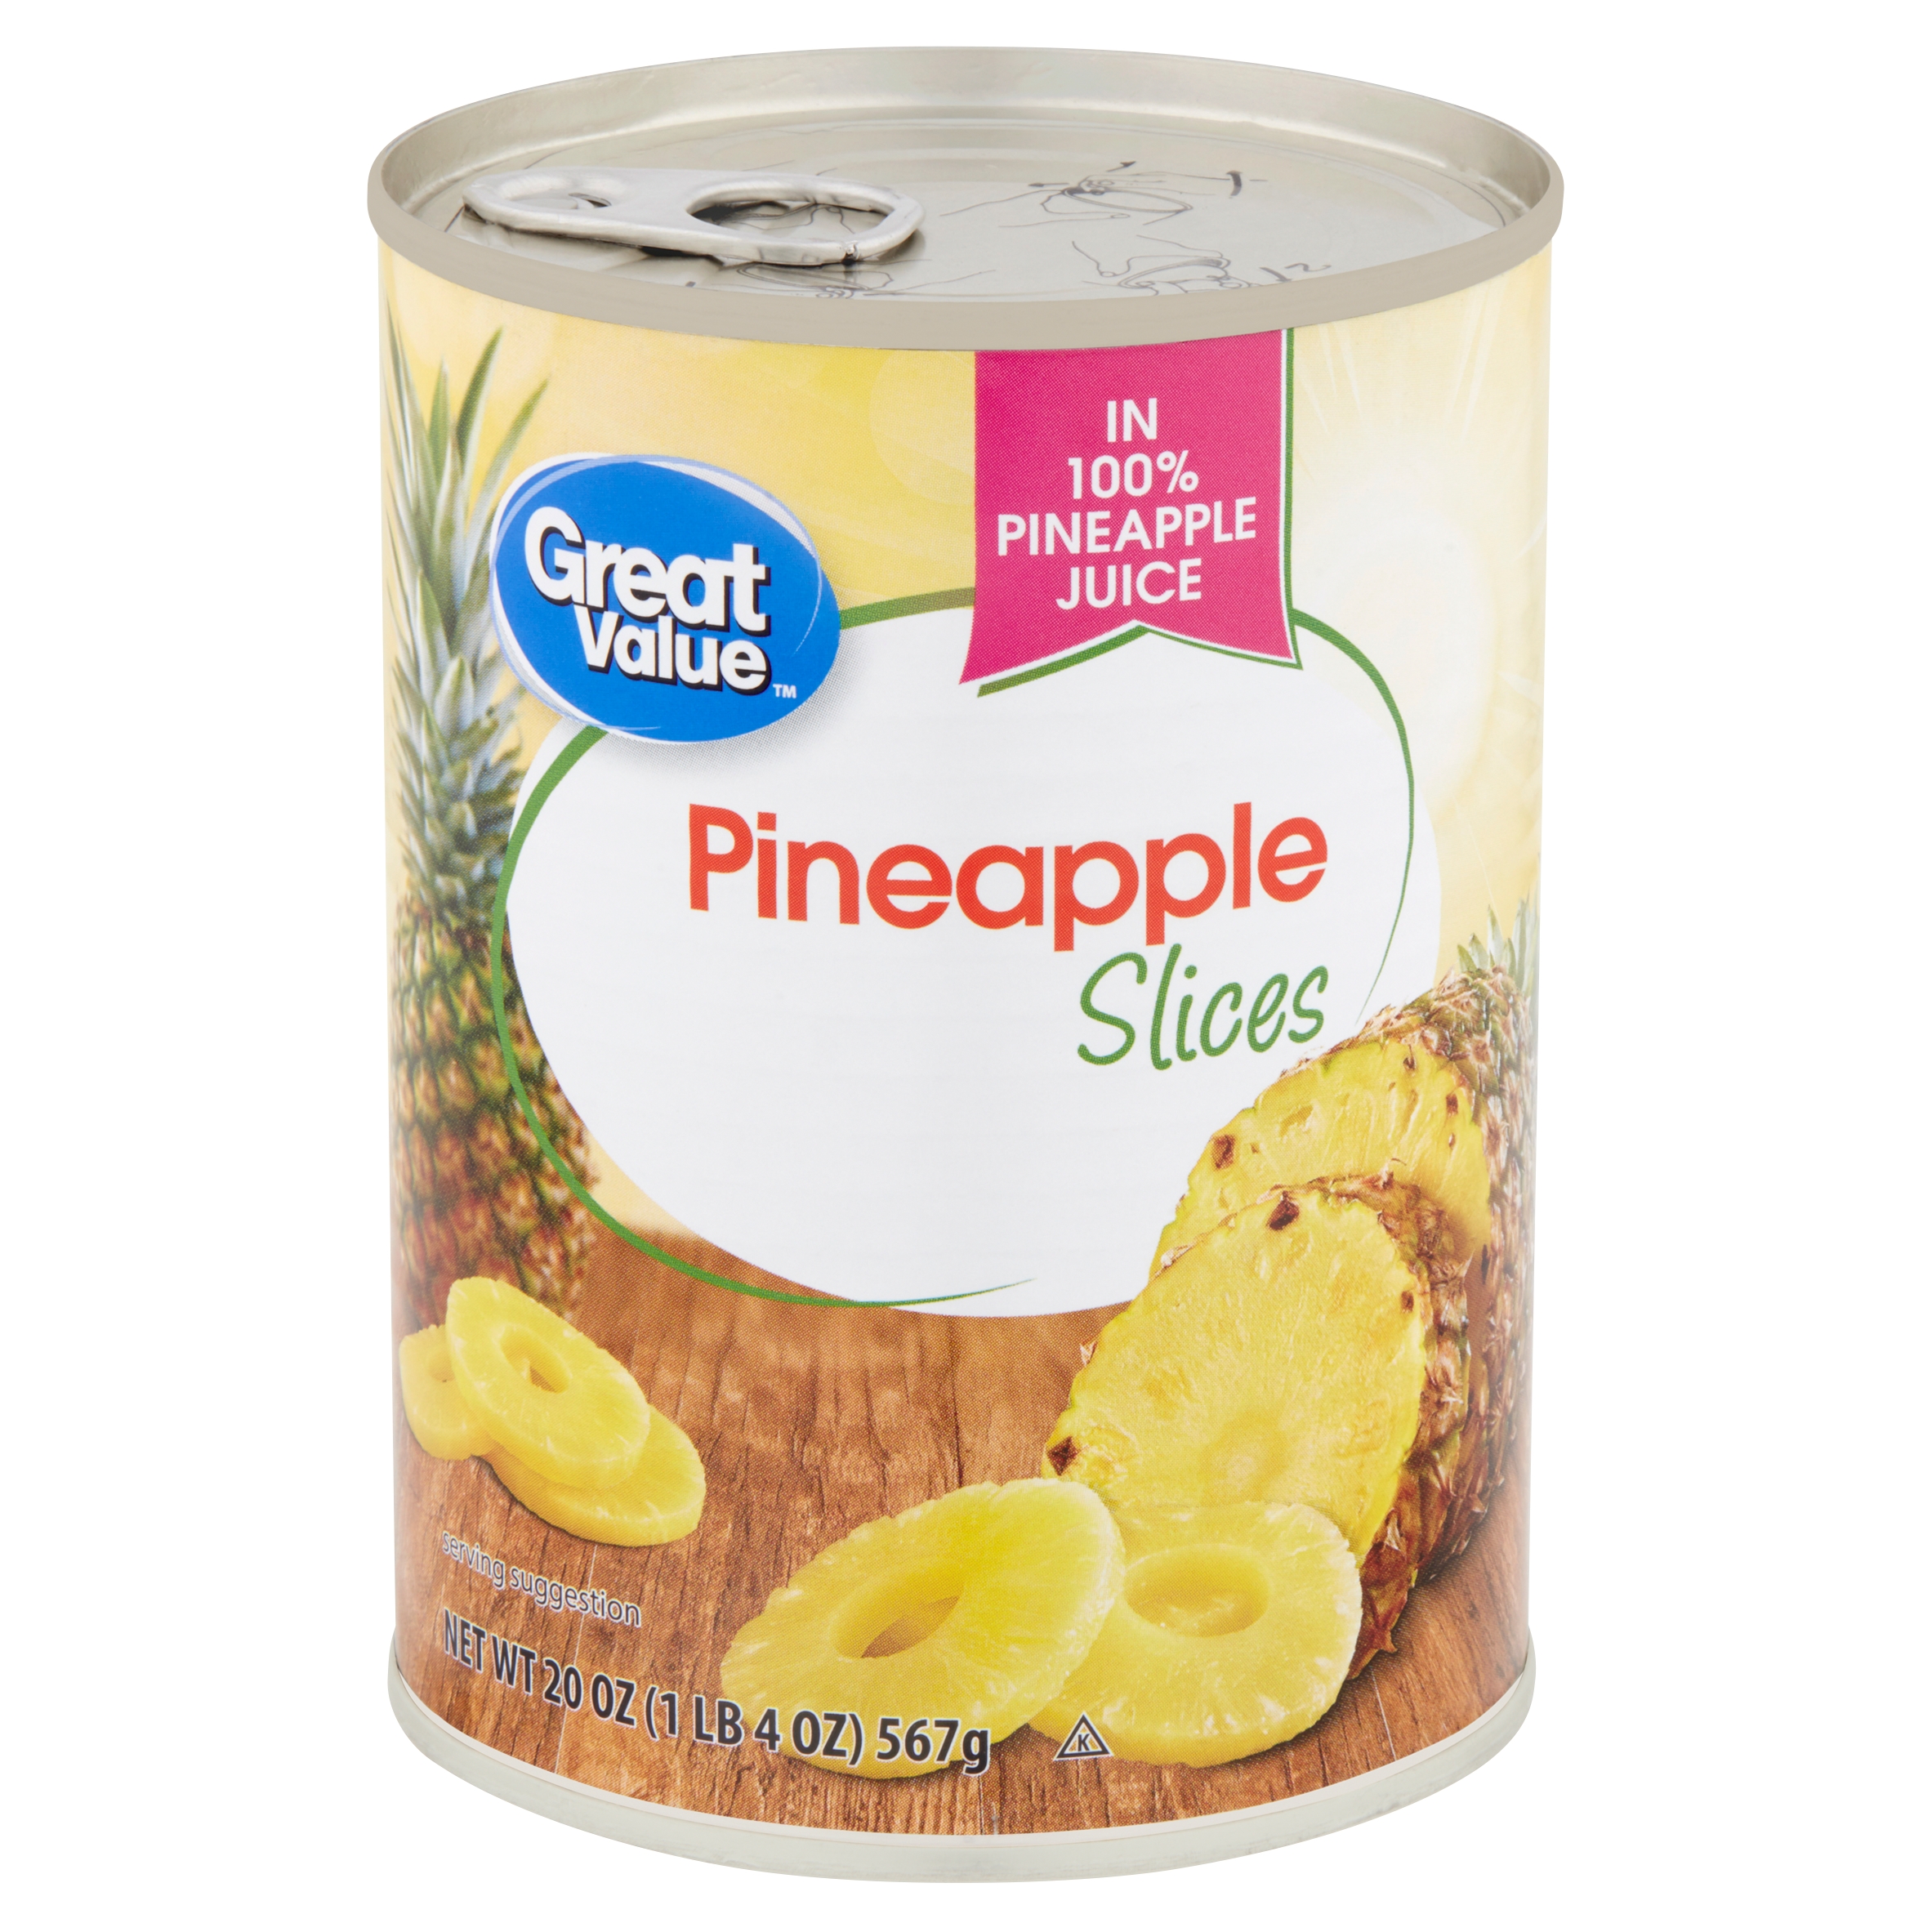 Great Value Pineapple Slices in 100% Juice, 20 Oz Can Image